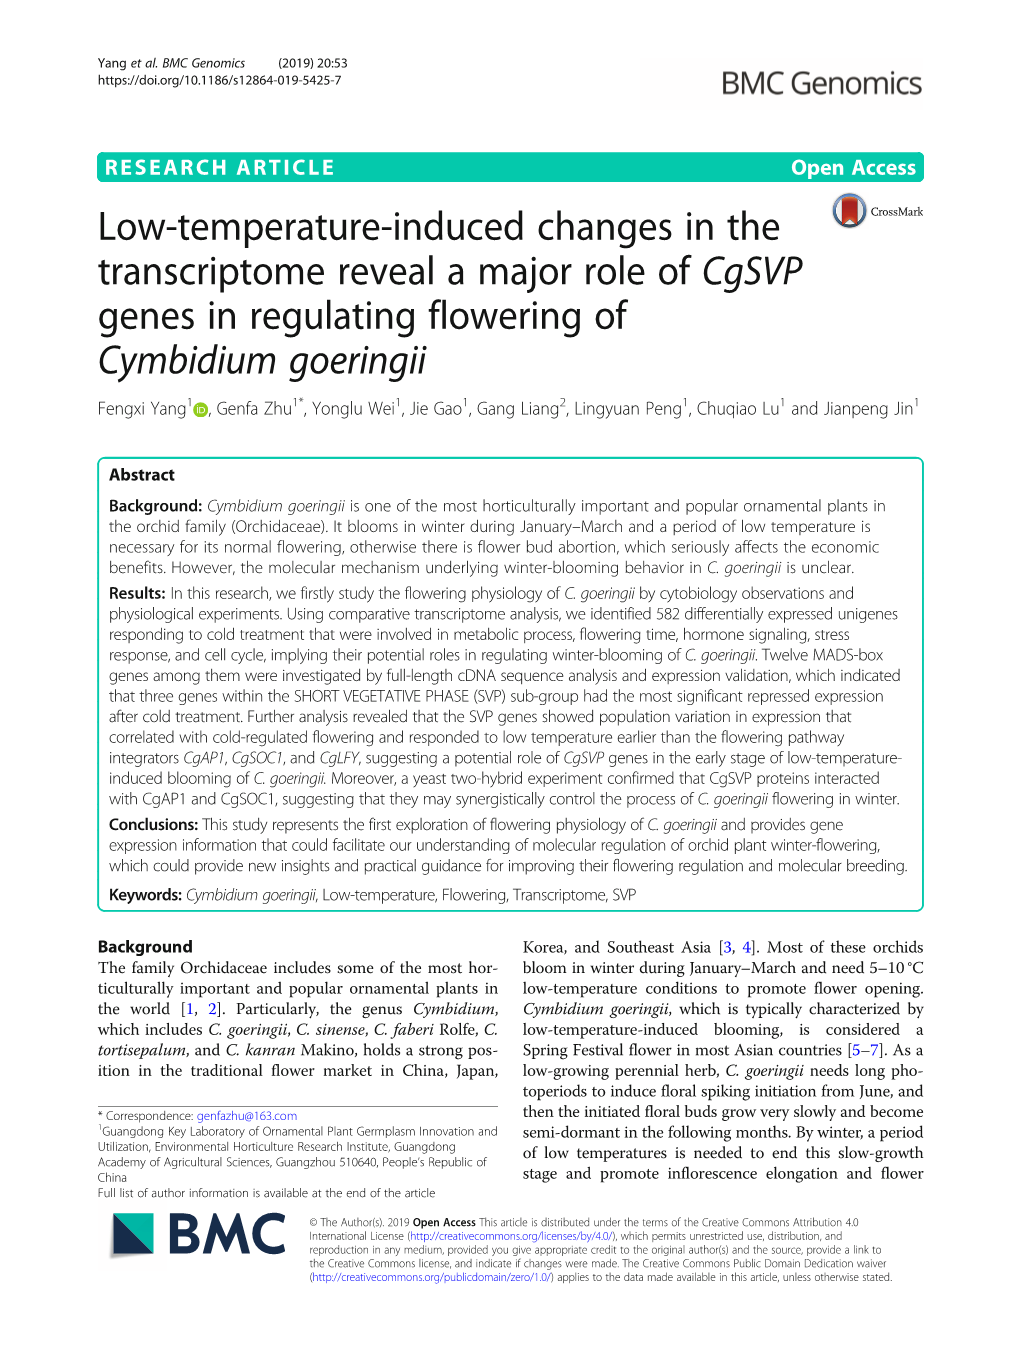 Low-Temperature-Induced Changes in the Transcriptome Reveal a Major Role of Cgsvp Genes in Regulating Flowering of Cymbidium